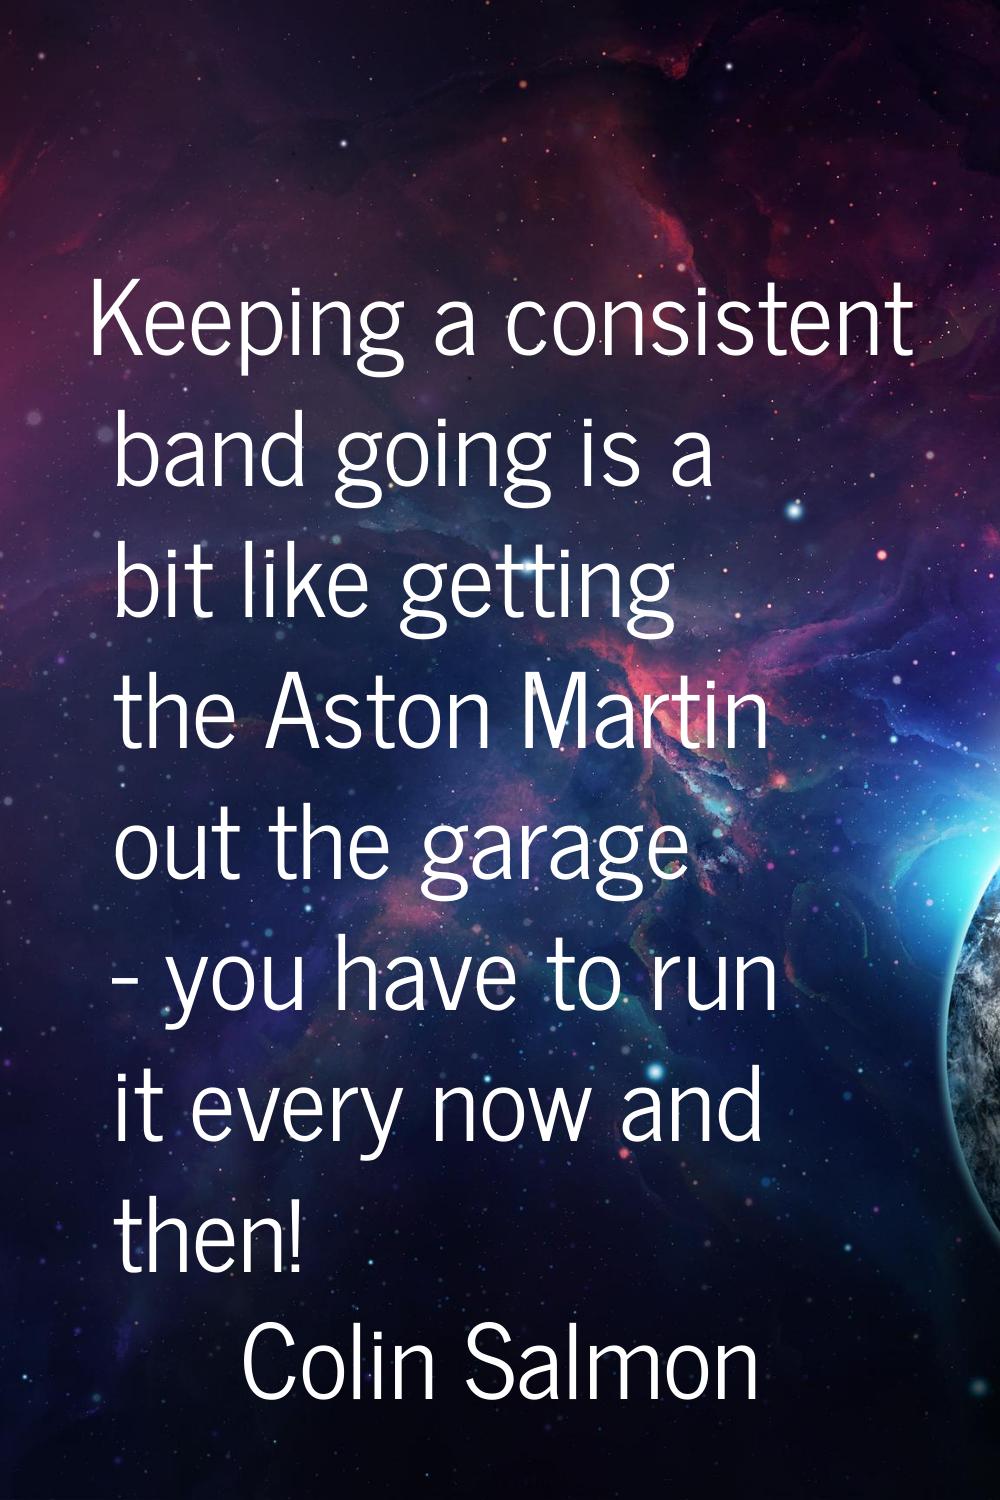 Keeping a consistent band going is a bit like getting the Aston Martin out the garage - you have to